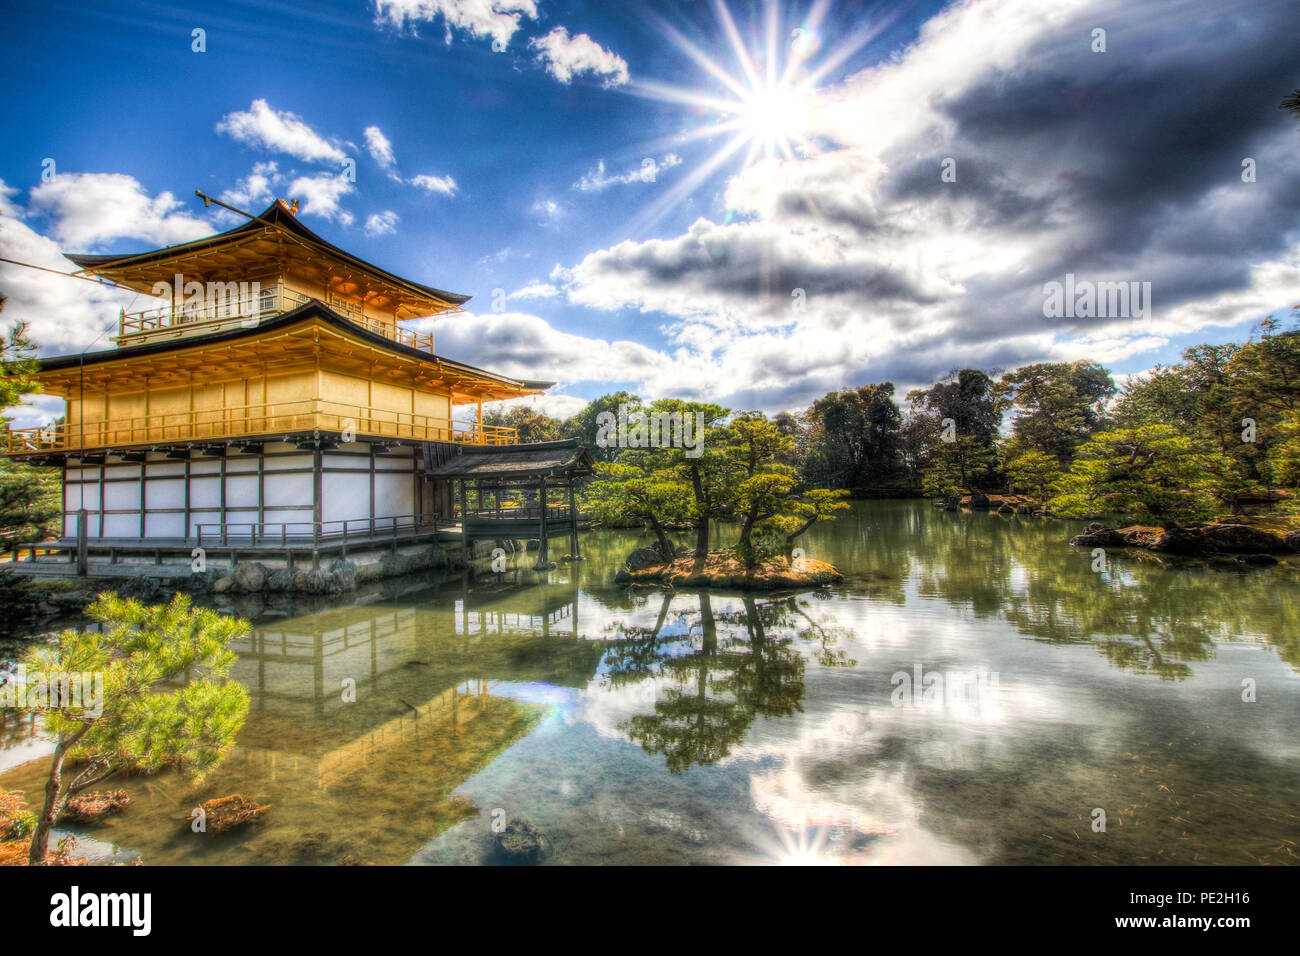 HDR image of the Kinkaku-ji temple (金閣寺, Temple of the Golden Pavilion) at the Kyoko-chi pond in Kyoto in the winter of 2017. Stock Photo